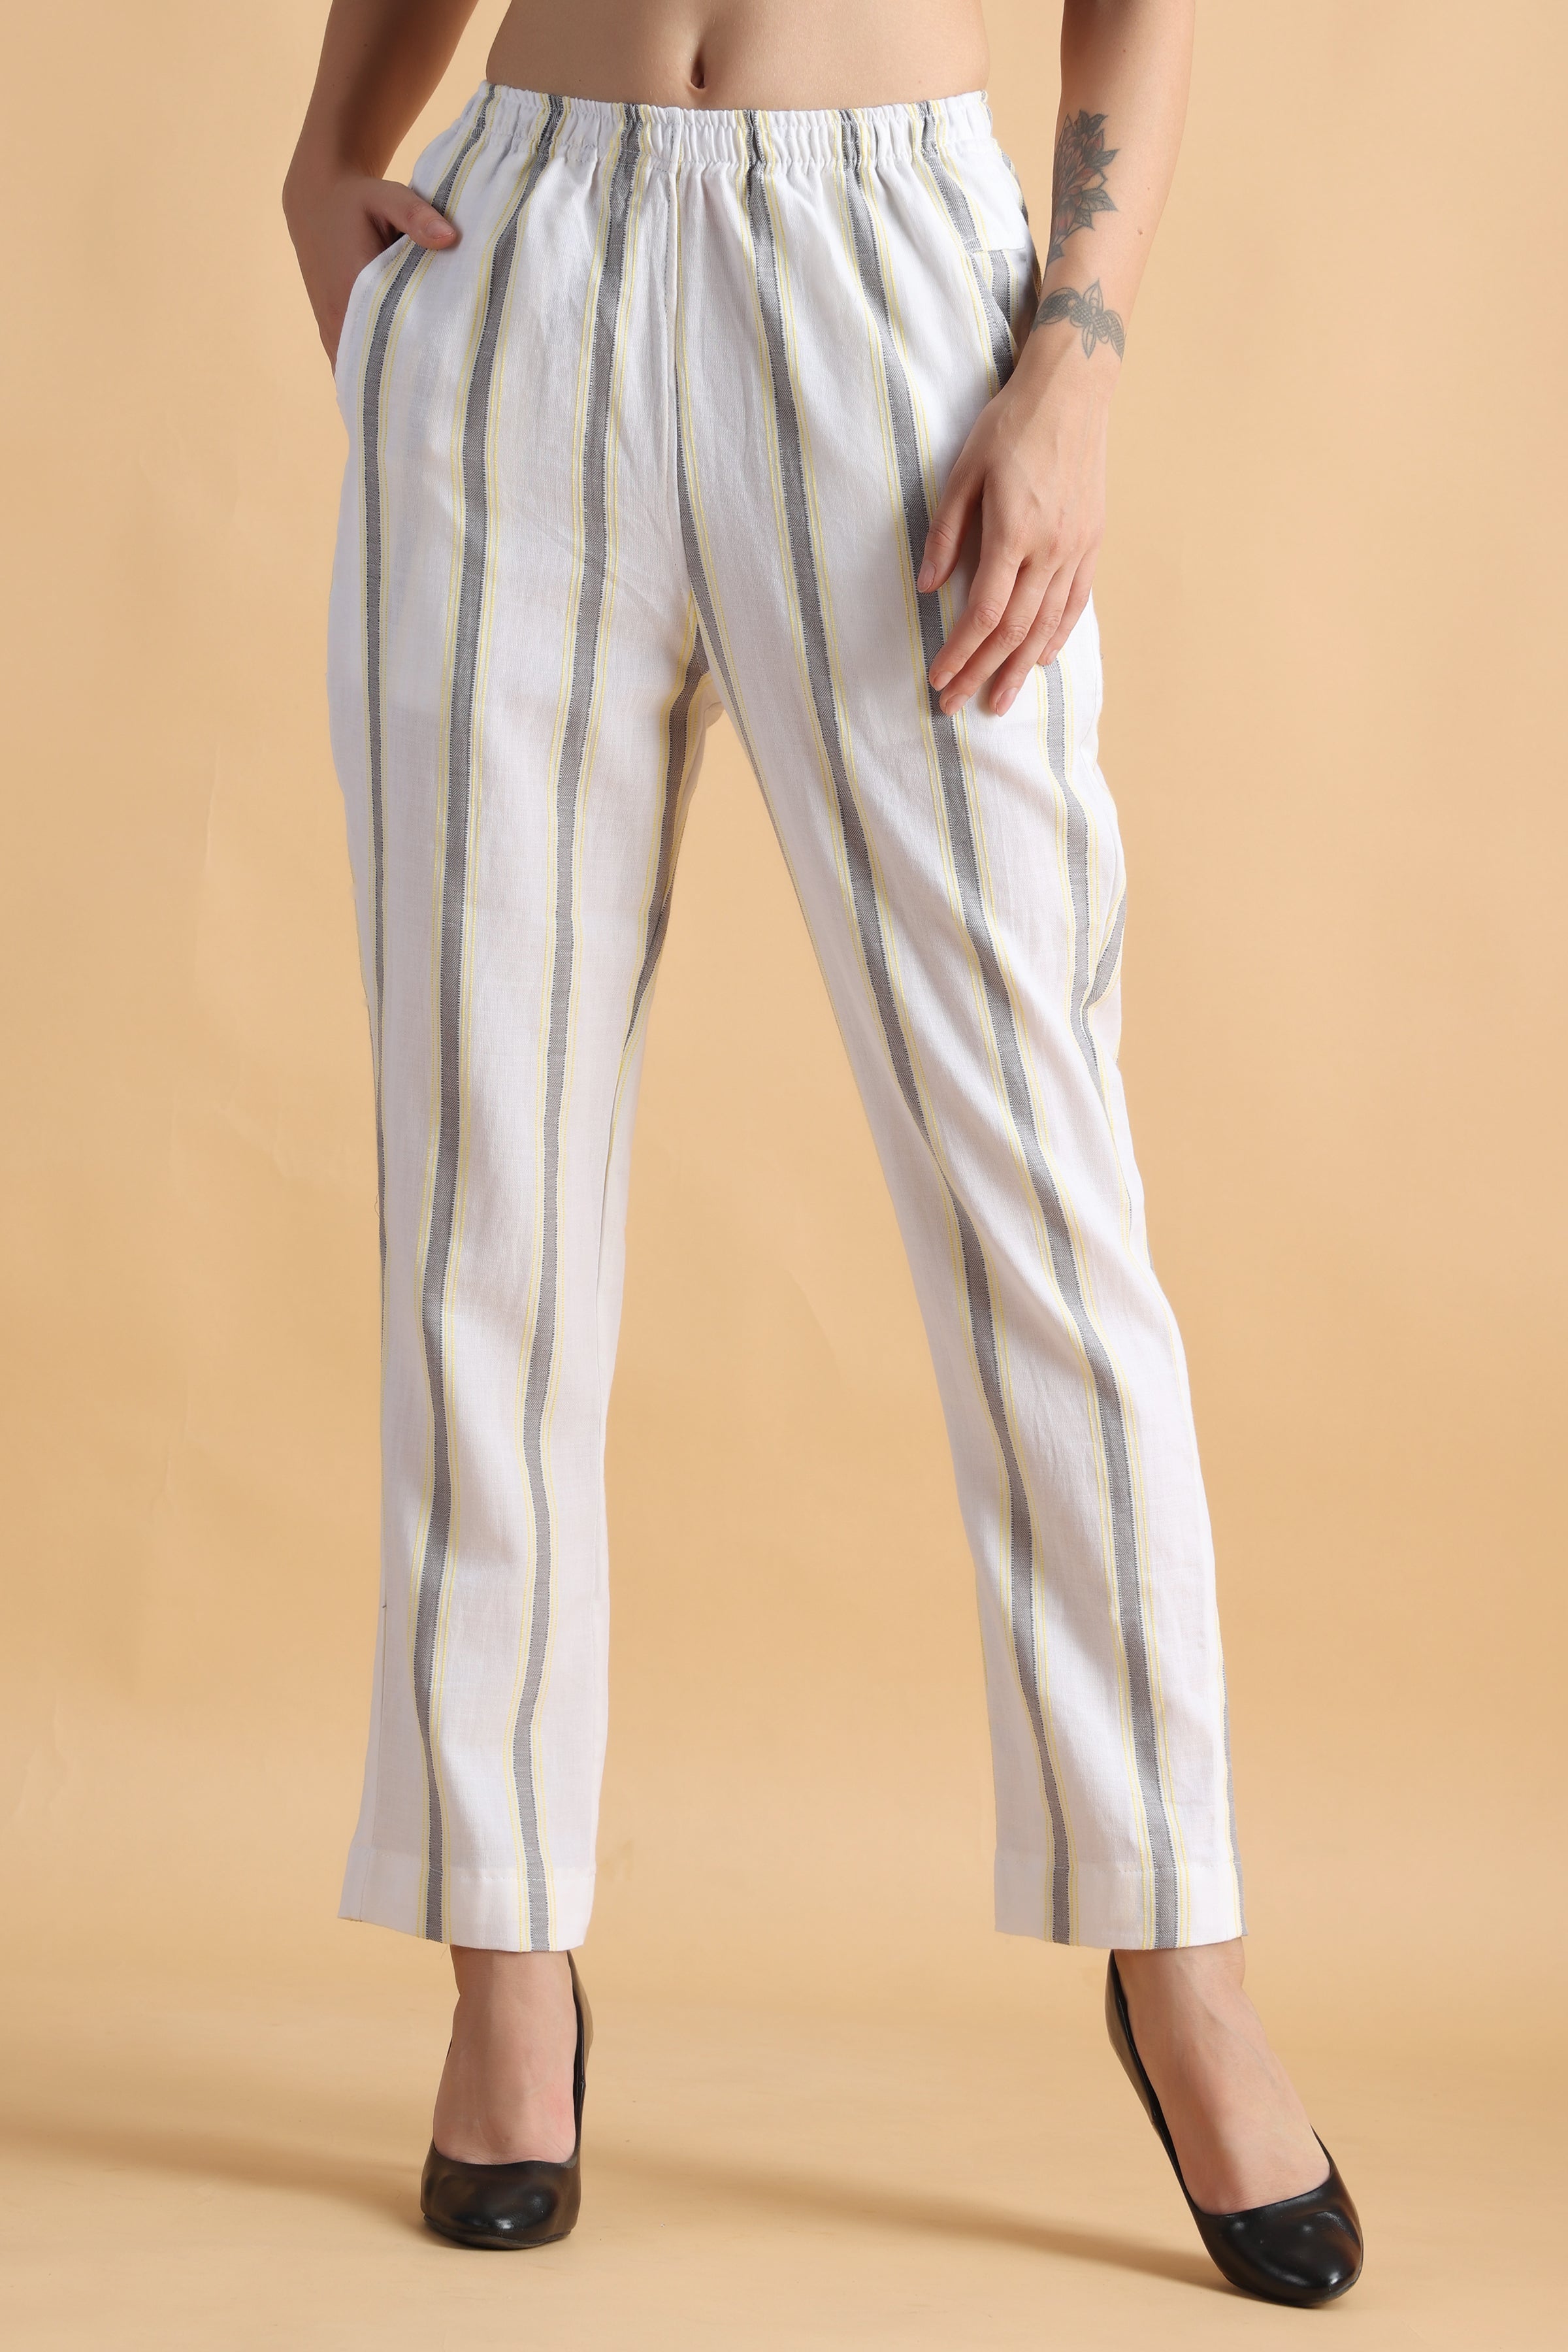 Cotton Flex Stripe Printed Regular Fit Casual Trouser Pants for Women   Yash Gallery